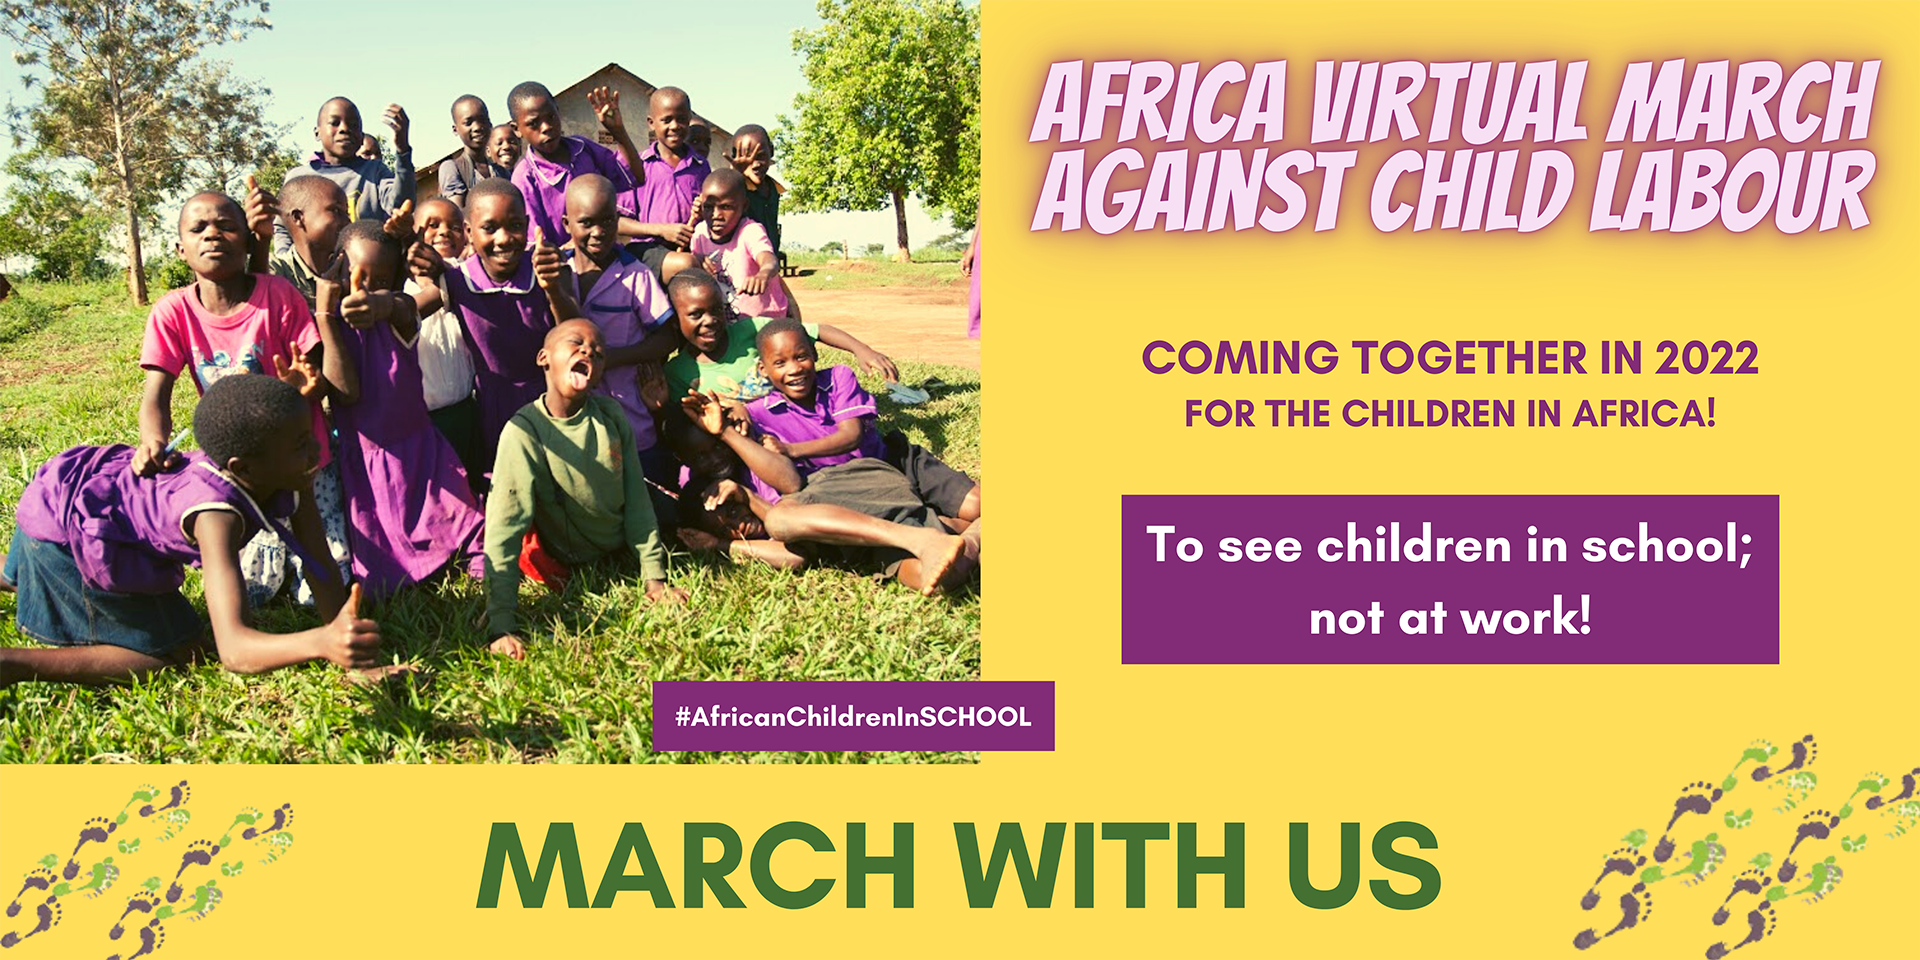 Africa Virtual March Against Child Labour